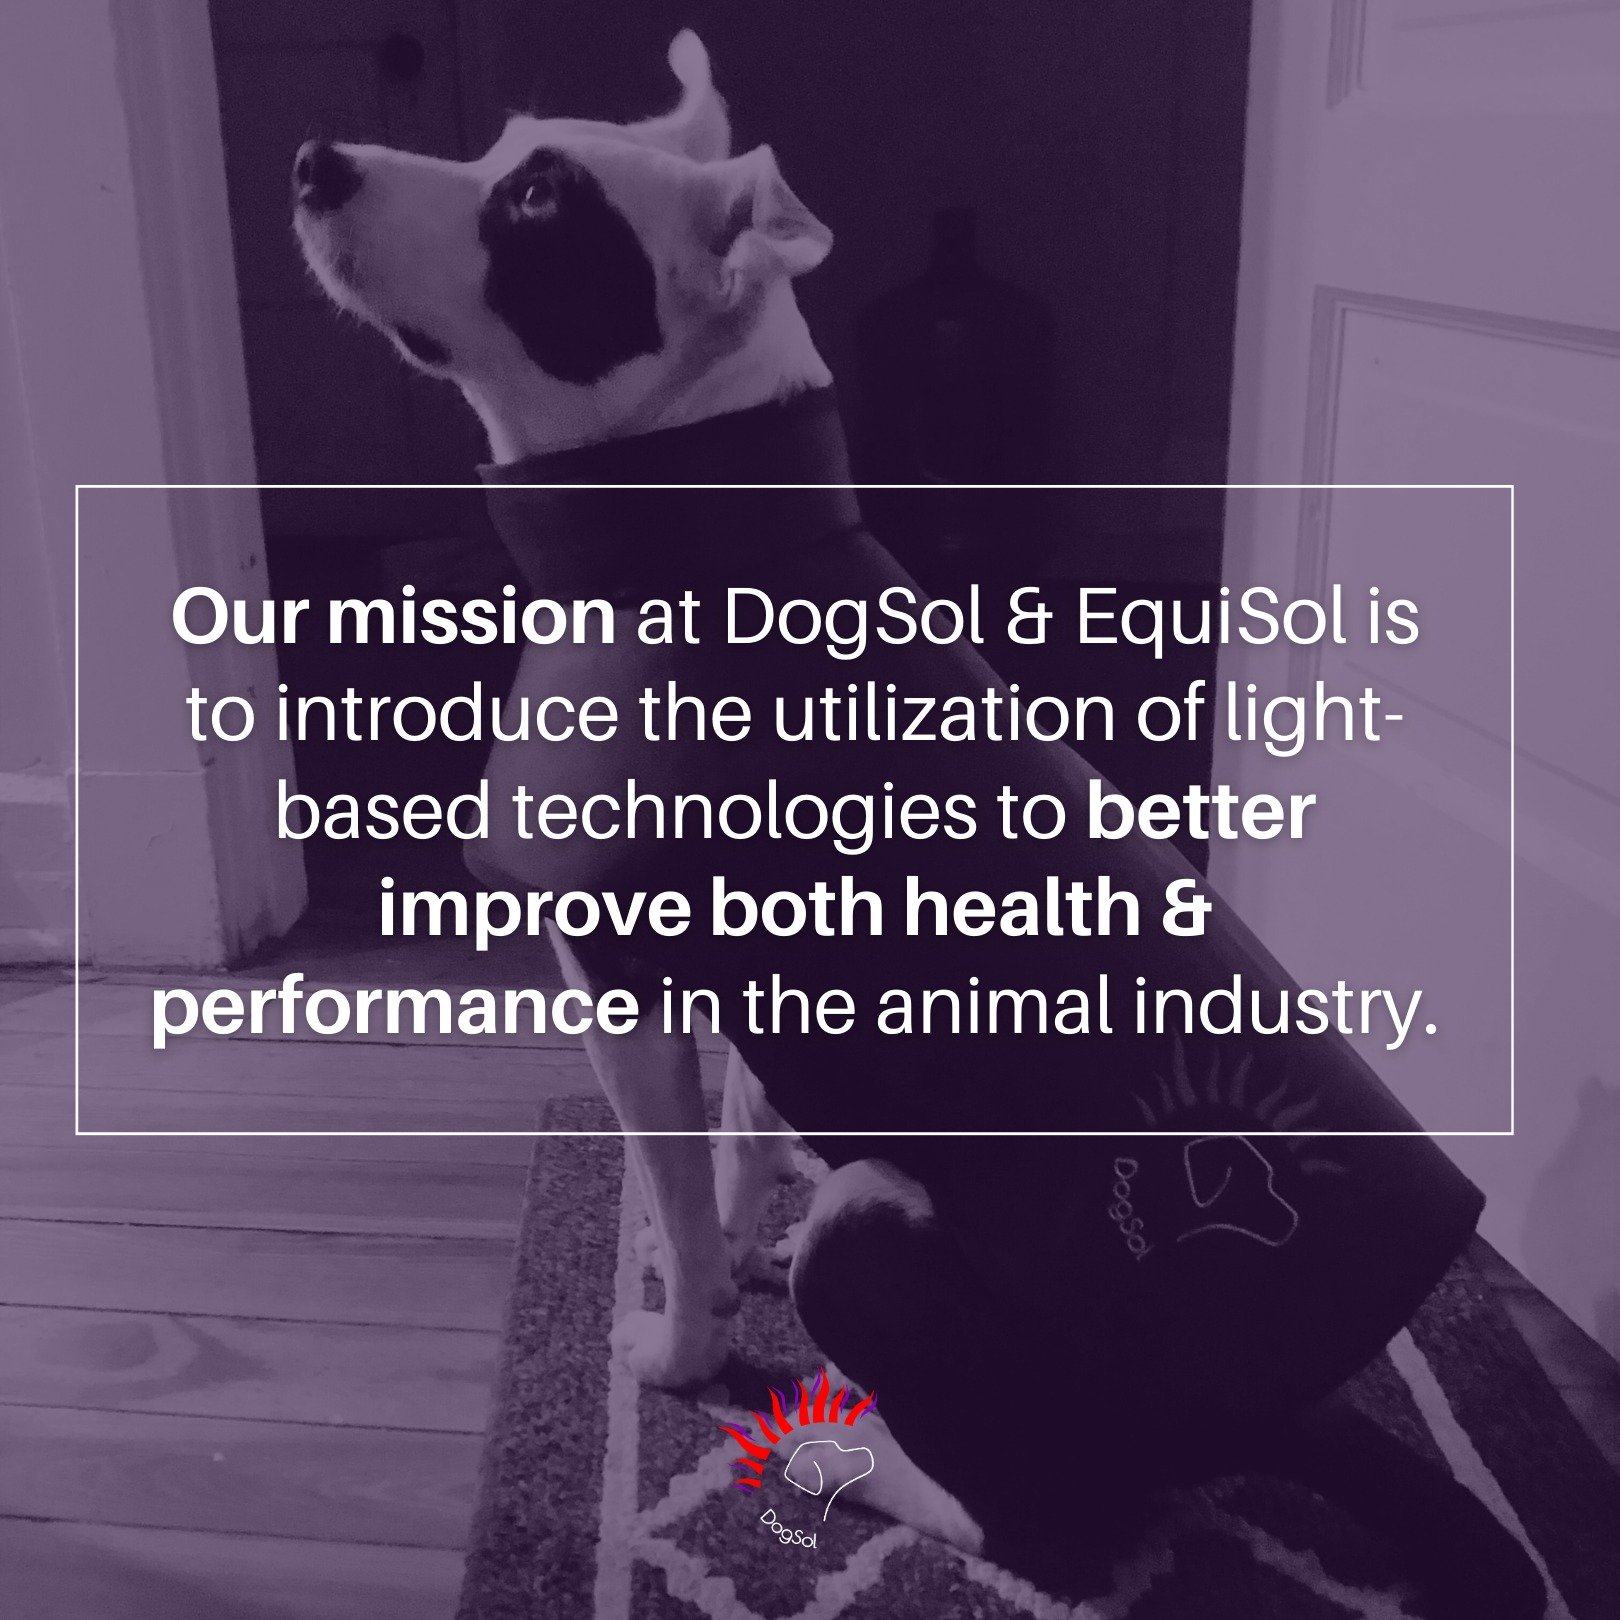 Our mission at DogSol &amp; EquiSol is to introduce the utilization of light-based technologies to better improve both health and performance in the animal industry.

Together with our American manufacturers, scientific research, and case studies, we